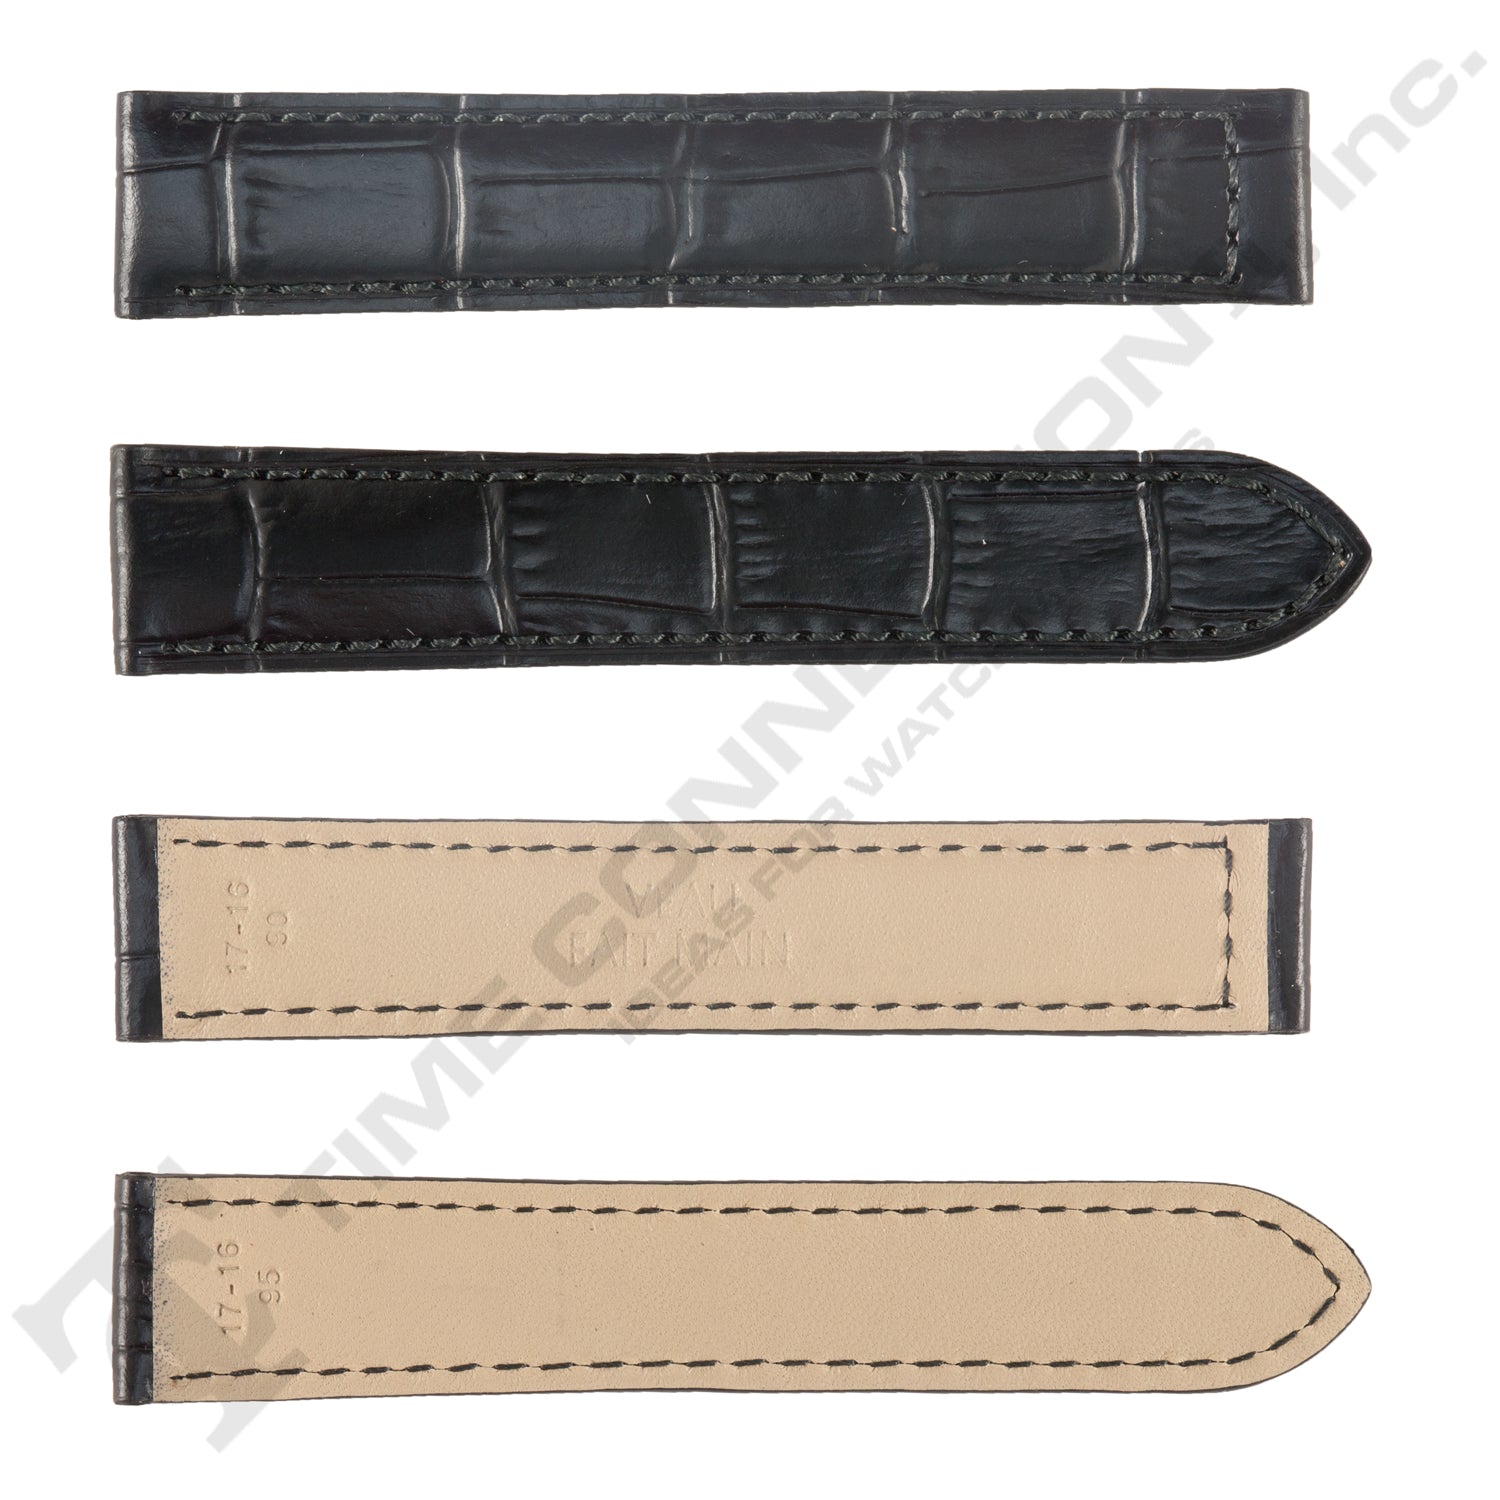 ZRC No. 729 Alligator Grain to fit Cartier Deployment Buckle Leather Straps(15mm~17mm)